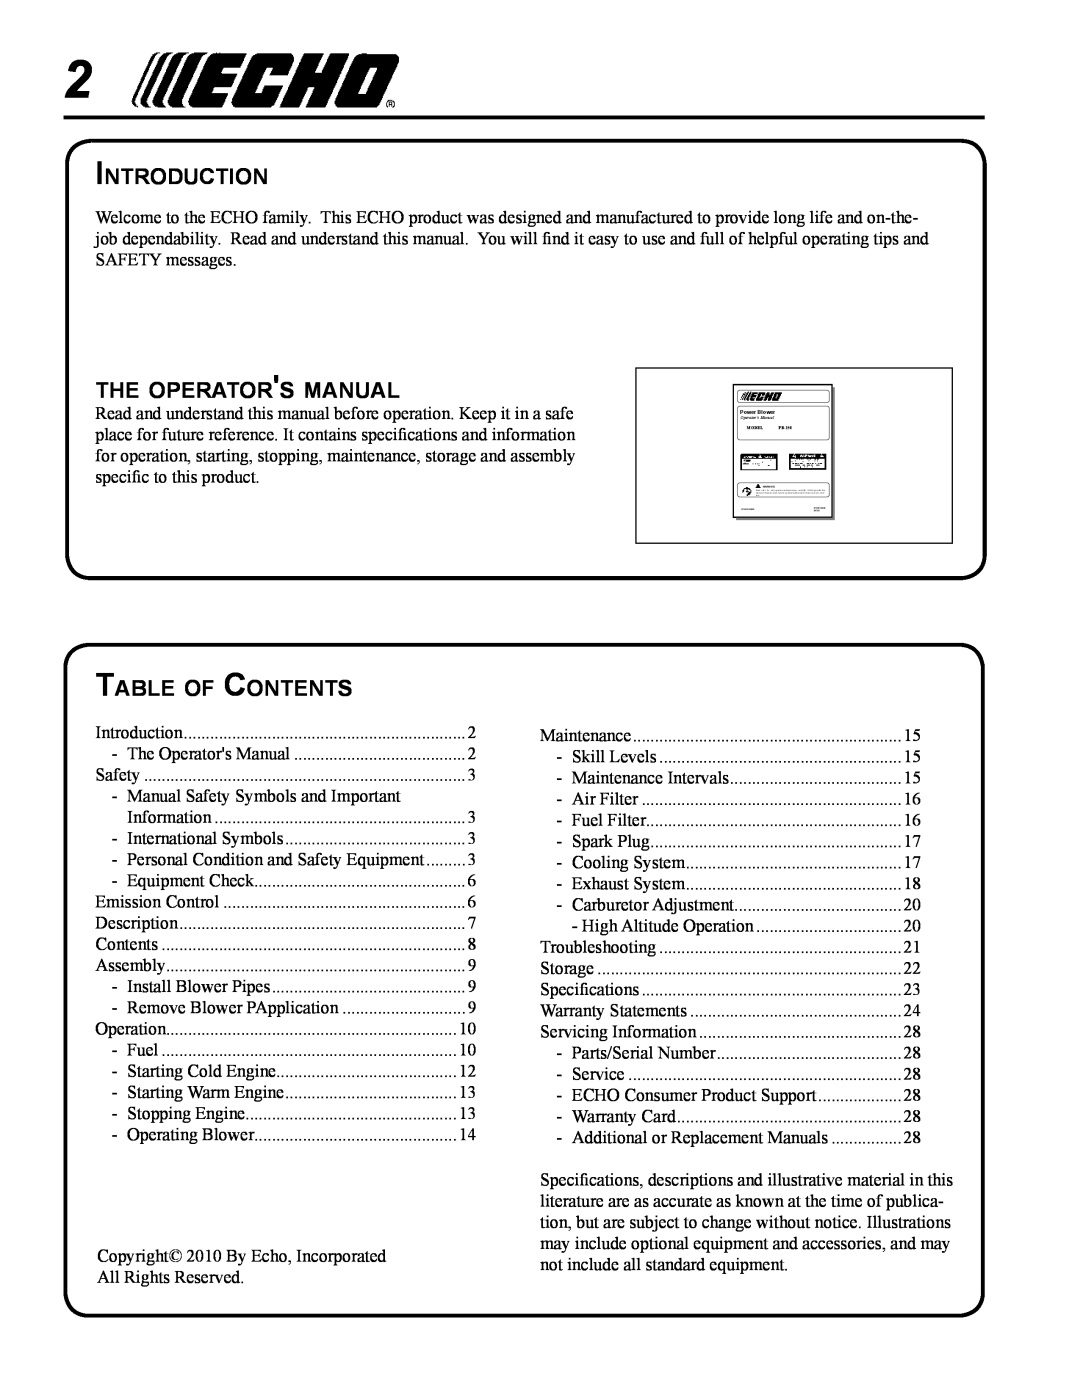 Echo PB-250 Introduction, the operators manual, Table of Contents 